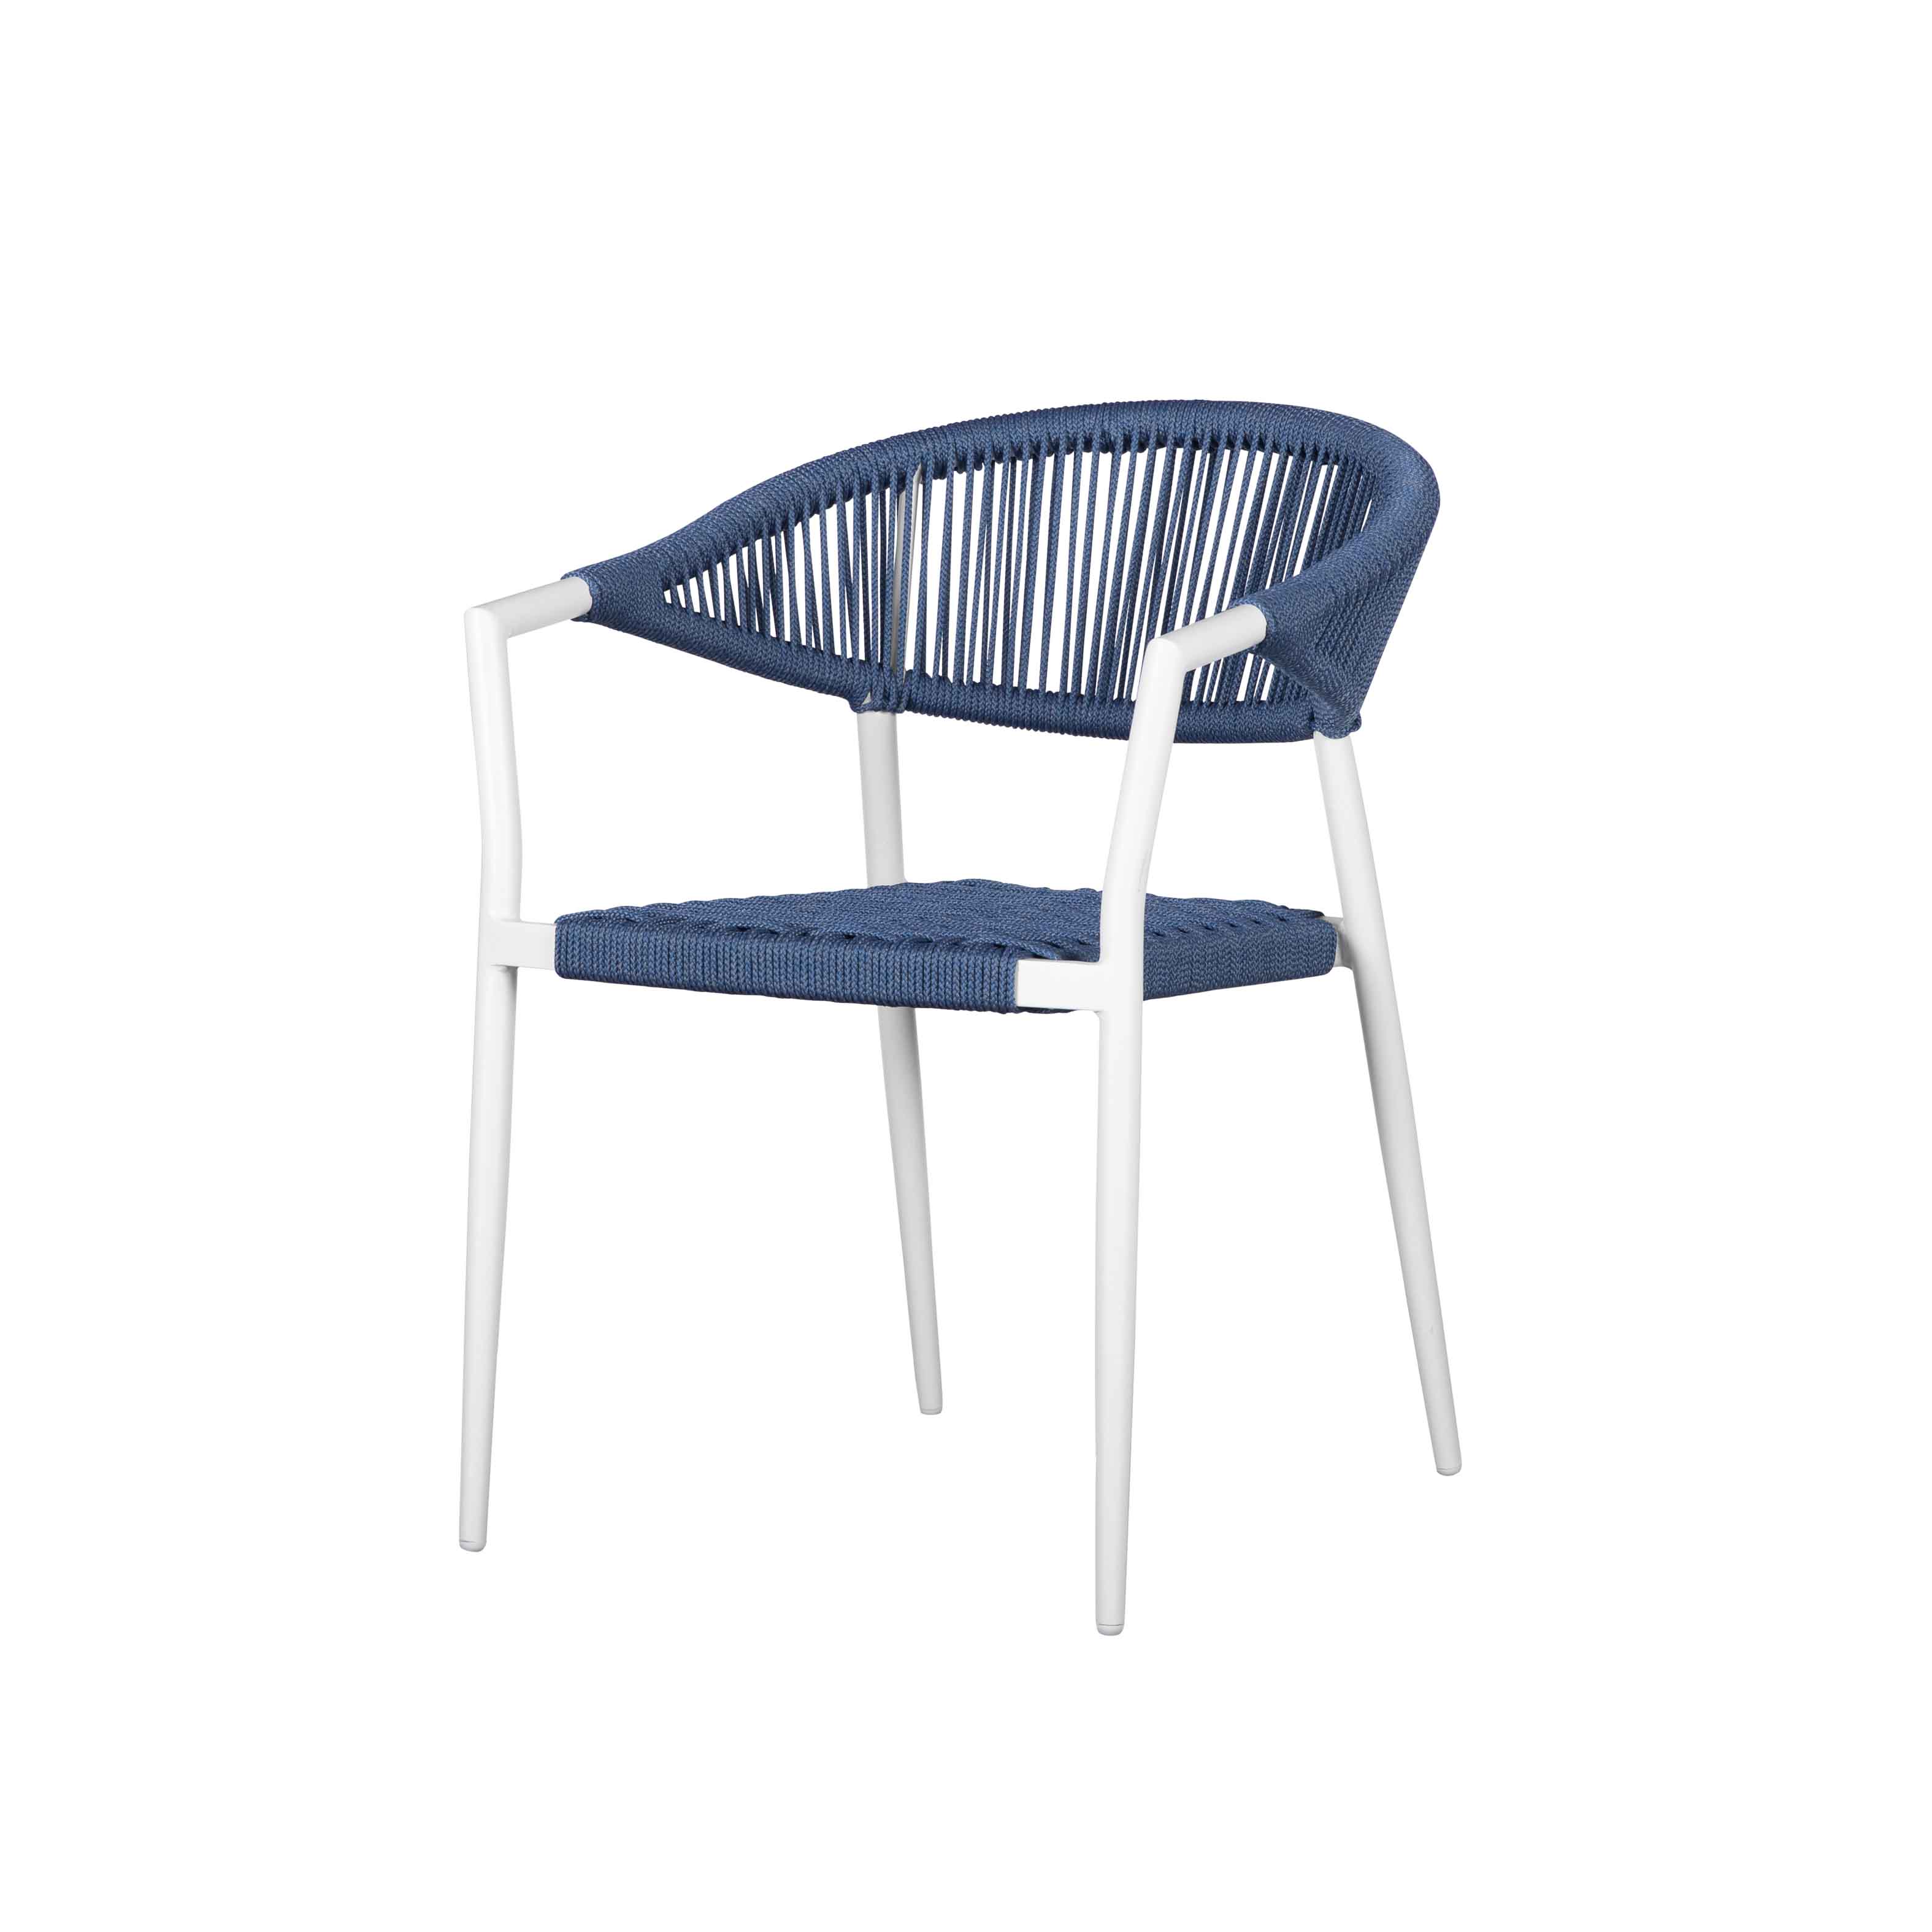 Camila rope dining chair S3